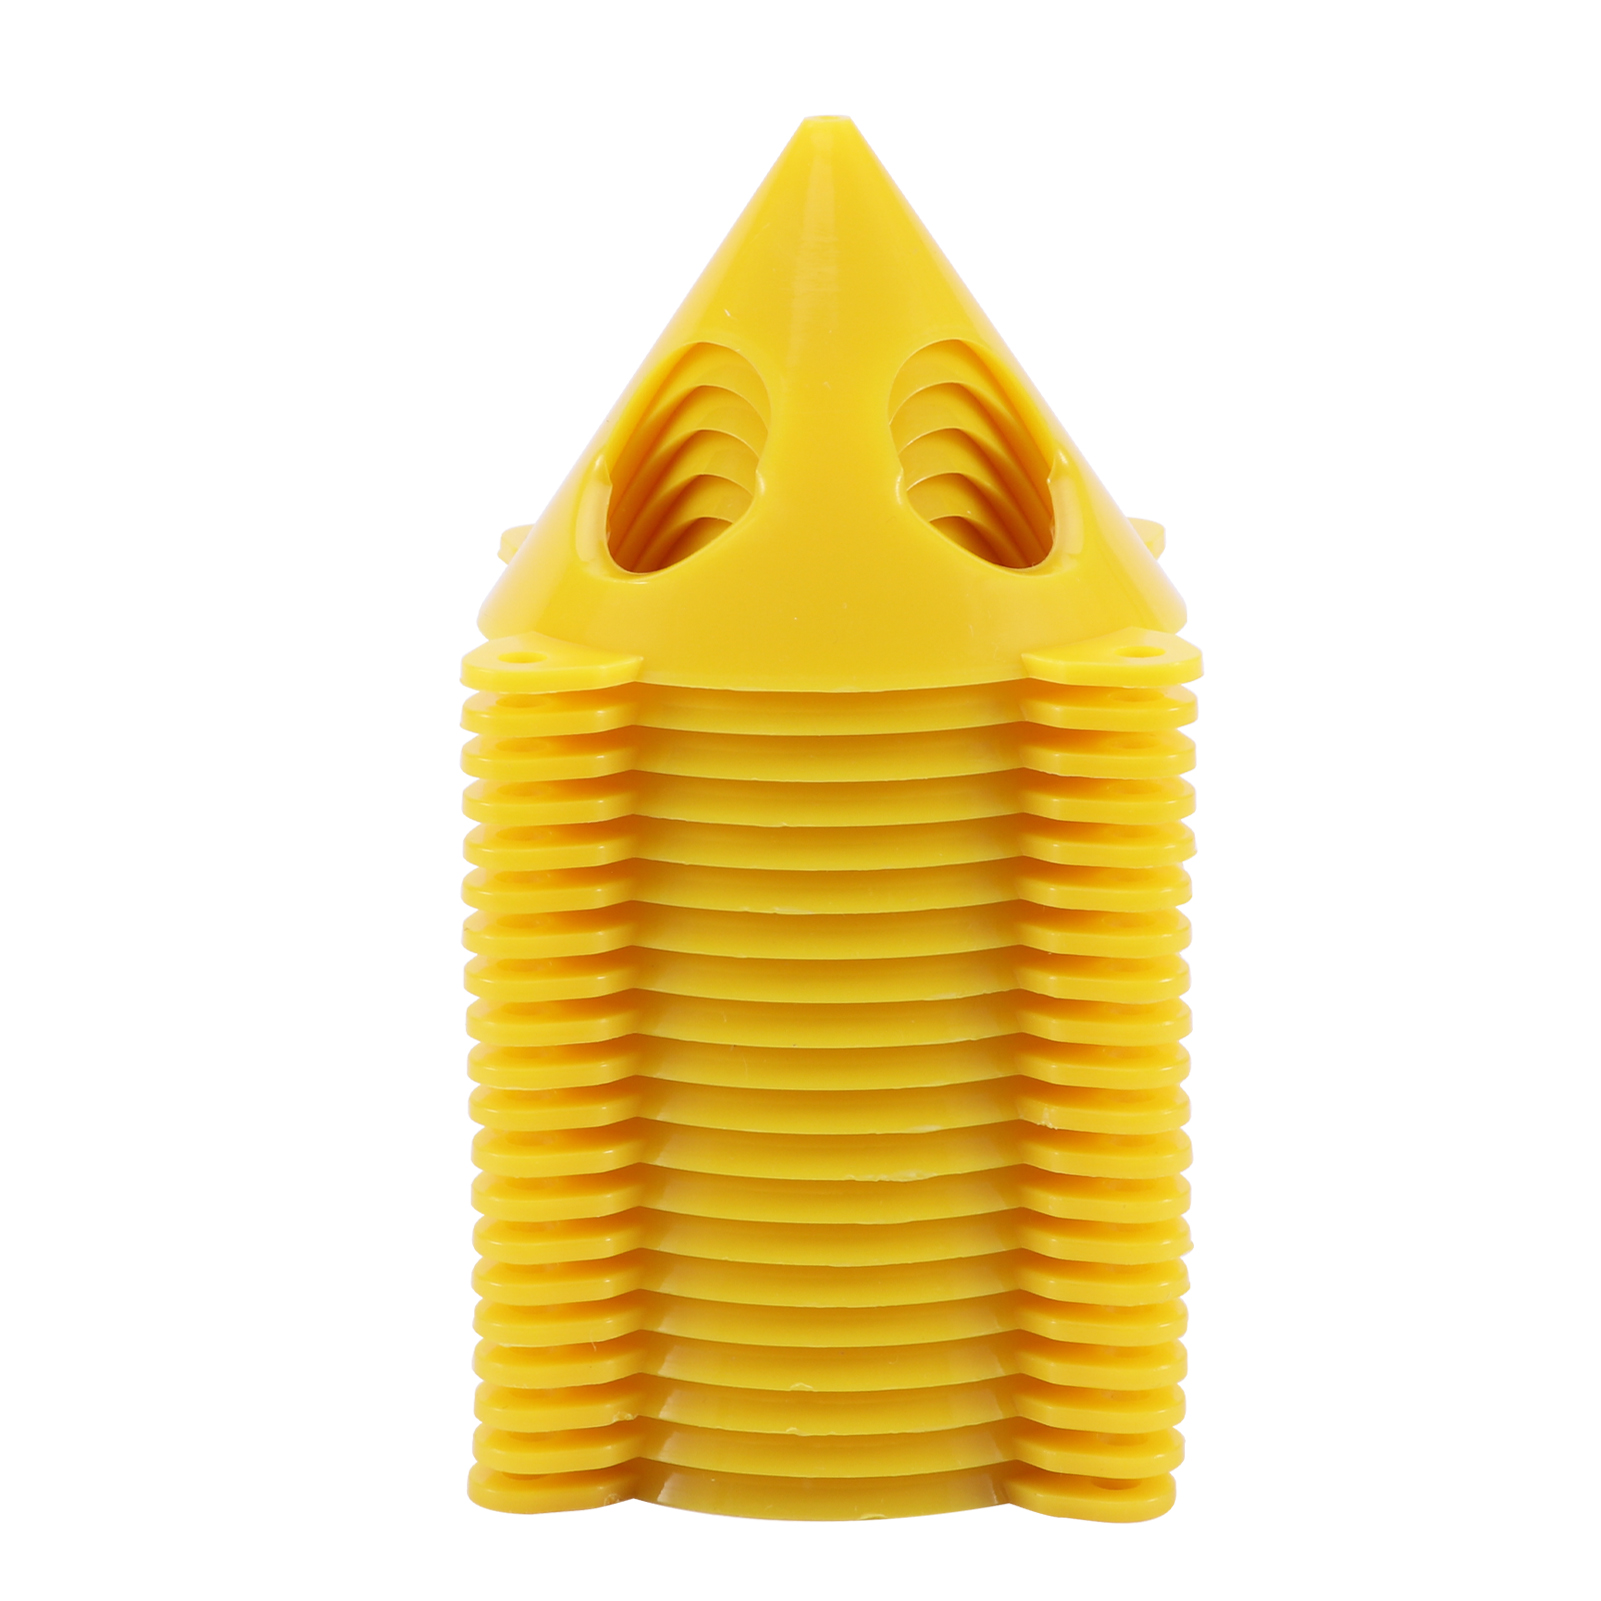 20pcs Paint Canvas Easy Grip Multipurpose Support Stands Mini Non-stick Crafts Furniture Door Risers Yellow Cone Clean Edges